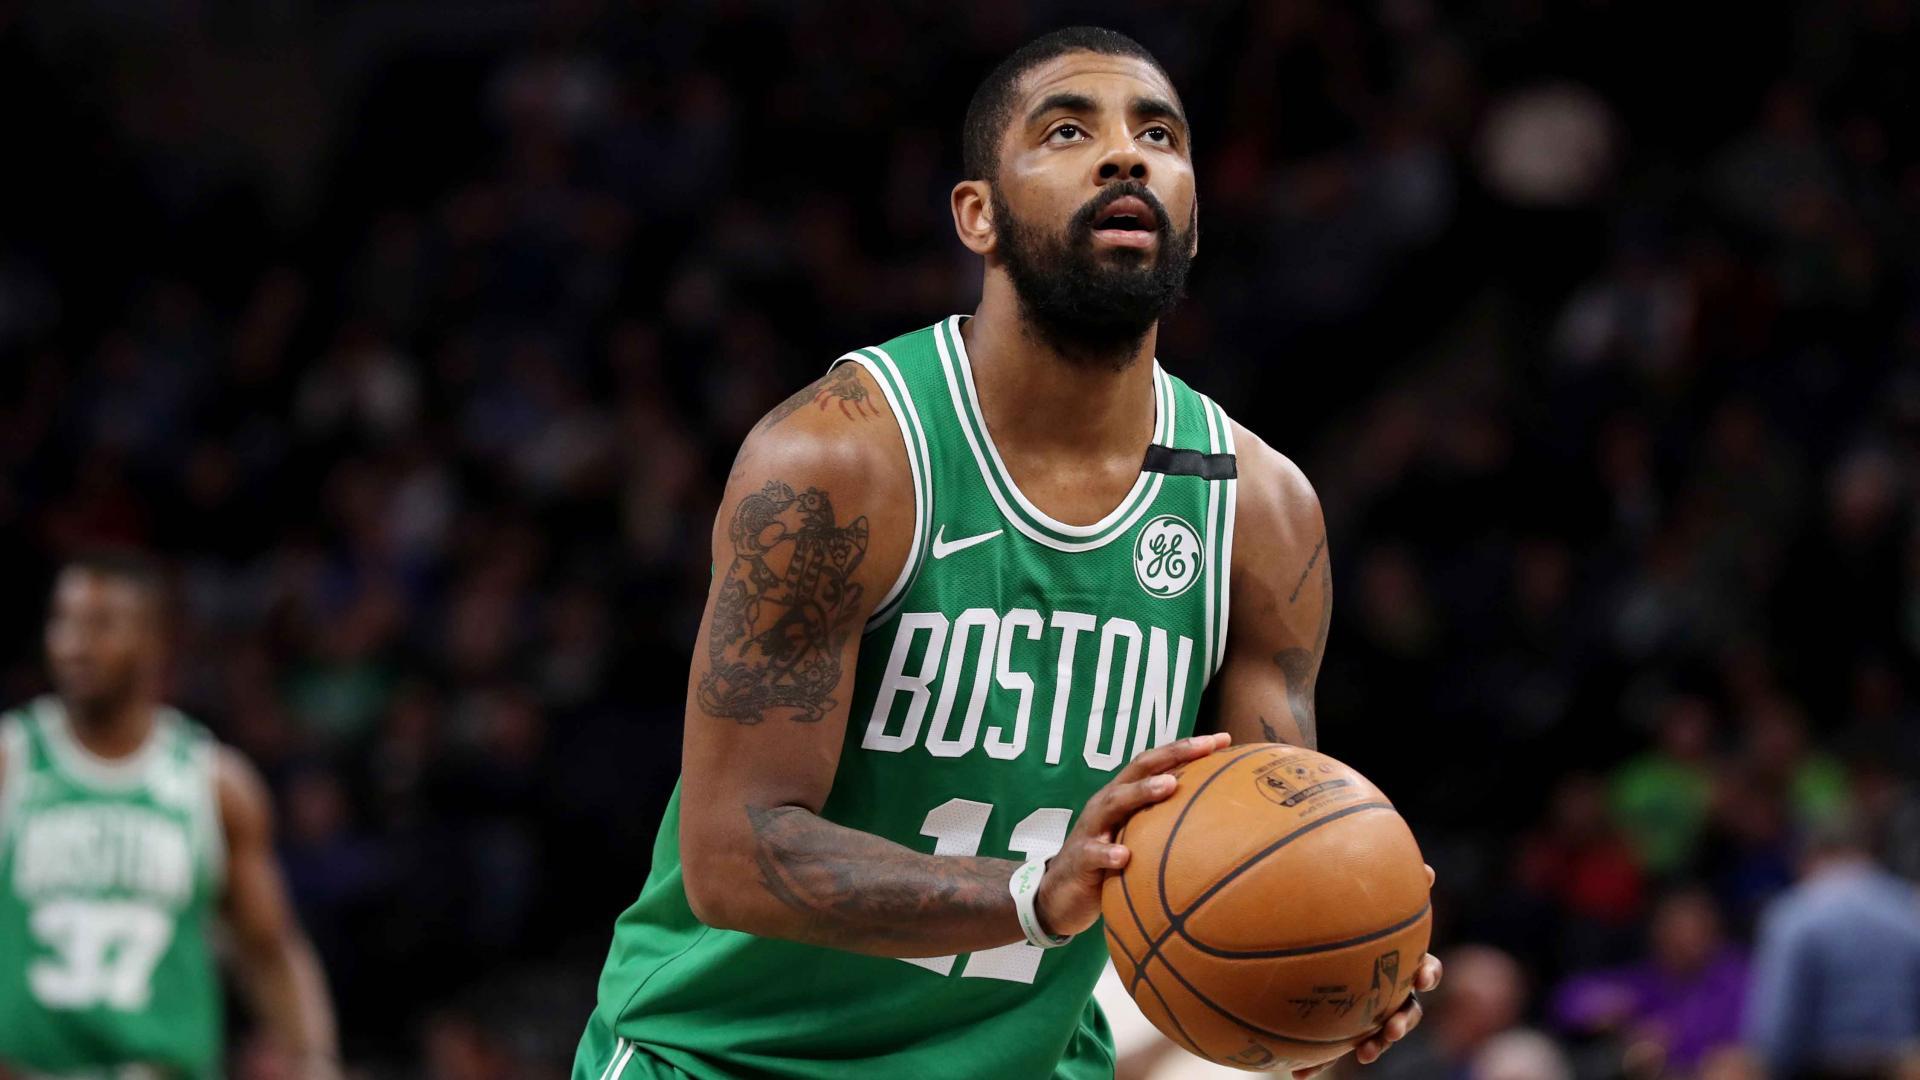 Kyrie Irving out for remainder of season and playoffs after surgery